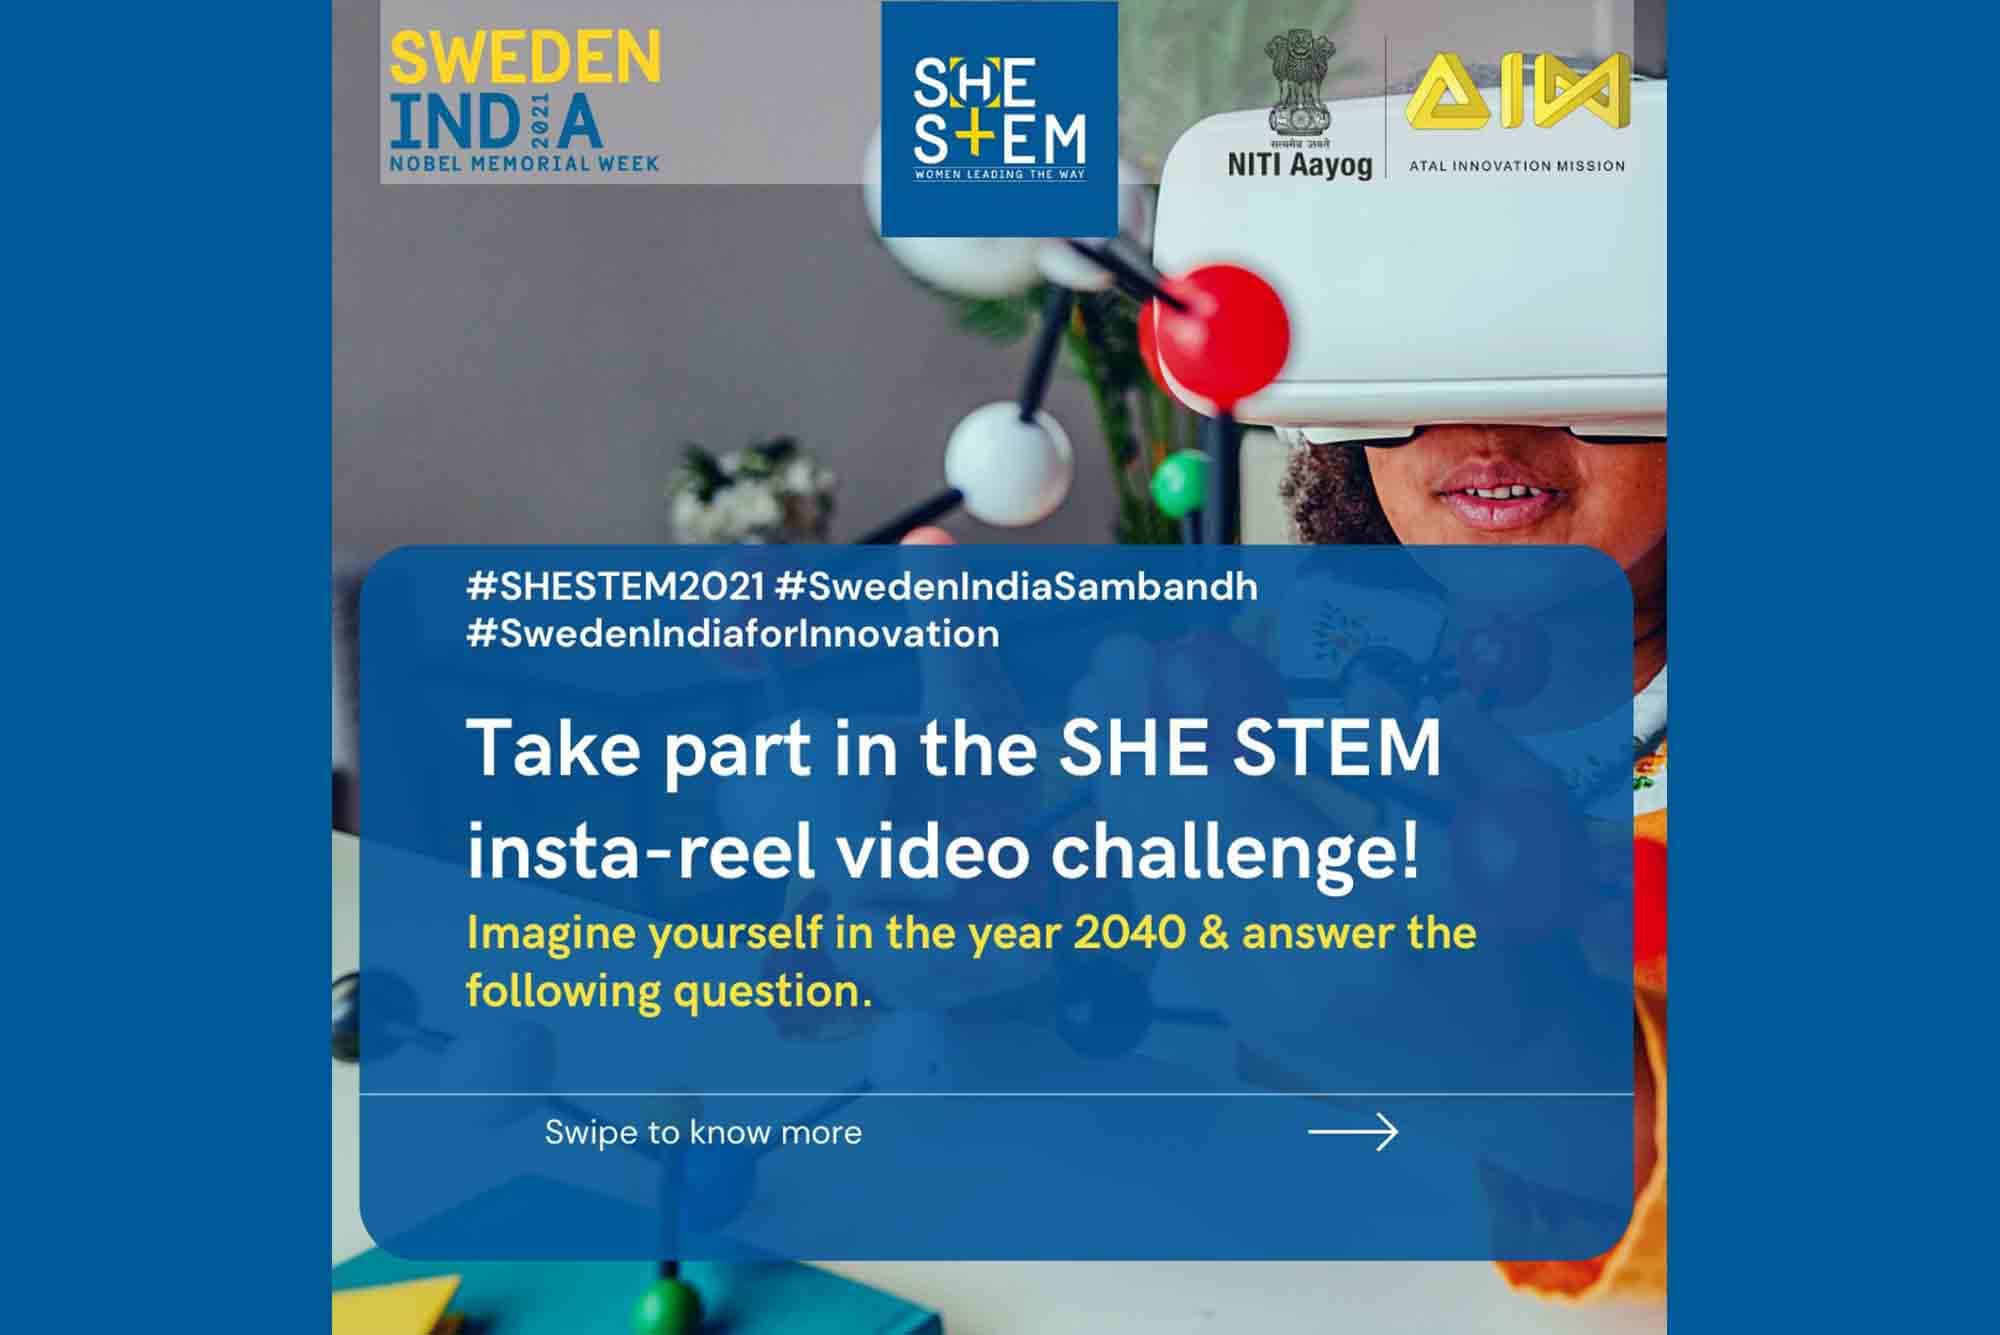 Participants need to record an Insta-reel video and submit it online.